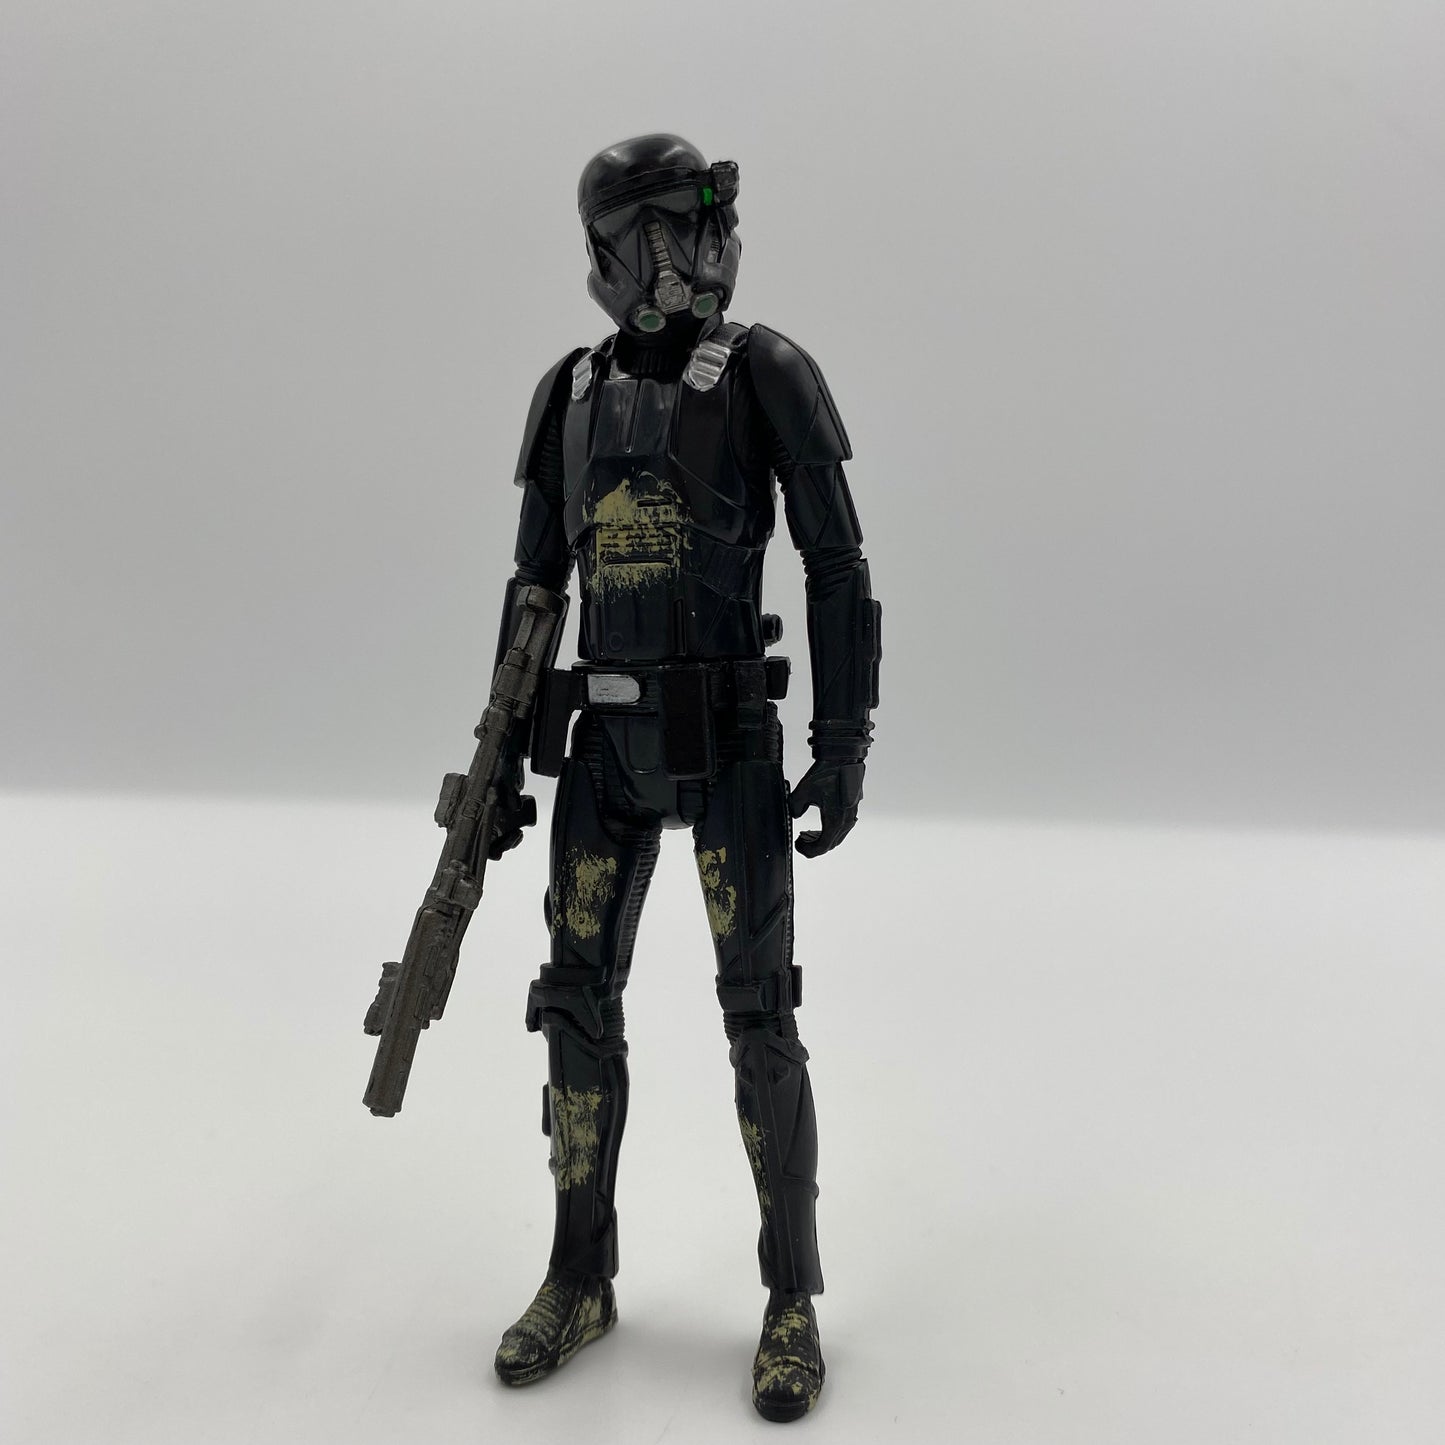 Star Wars Rogue One “Dirty” Death Trooper 3.75” loose action figure (2016) Hasbro